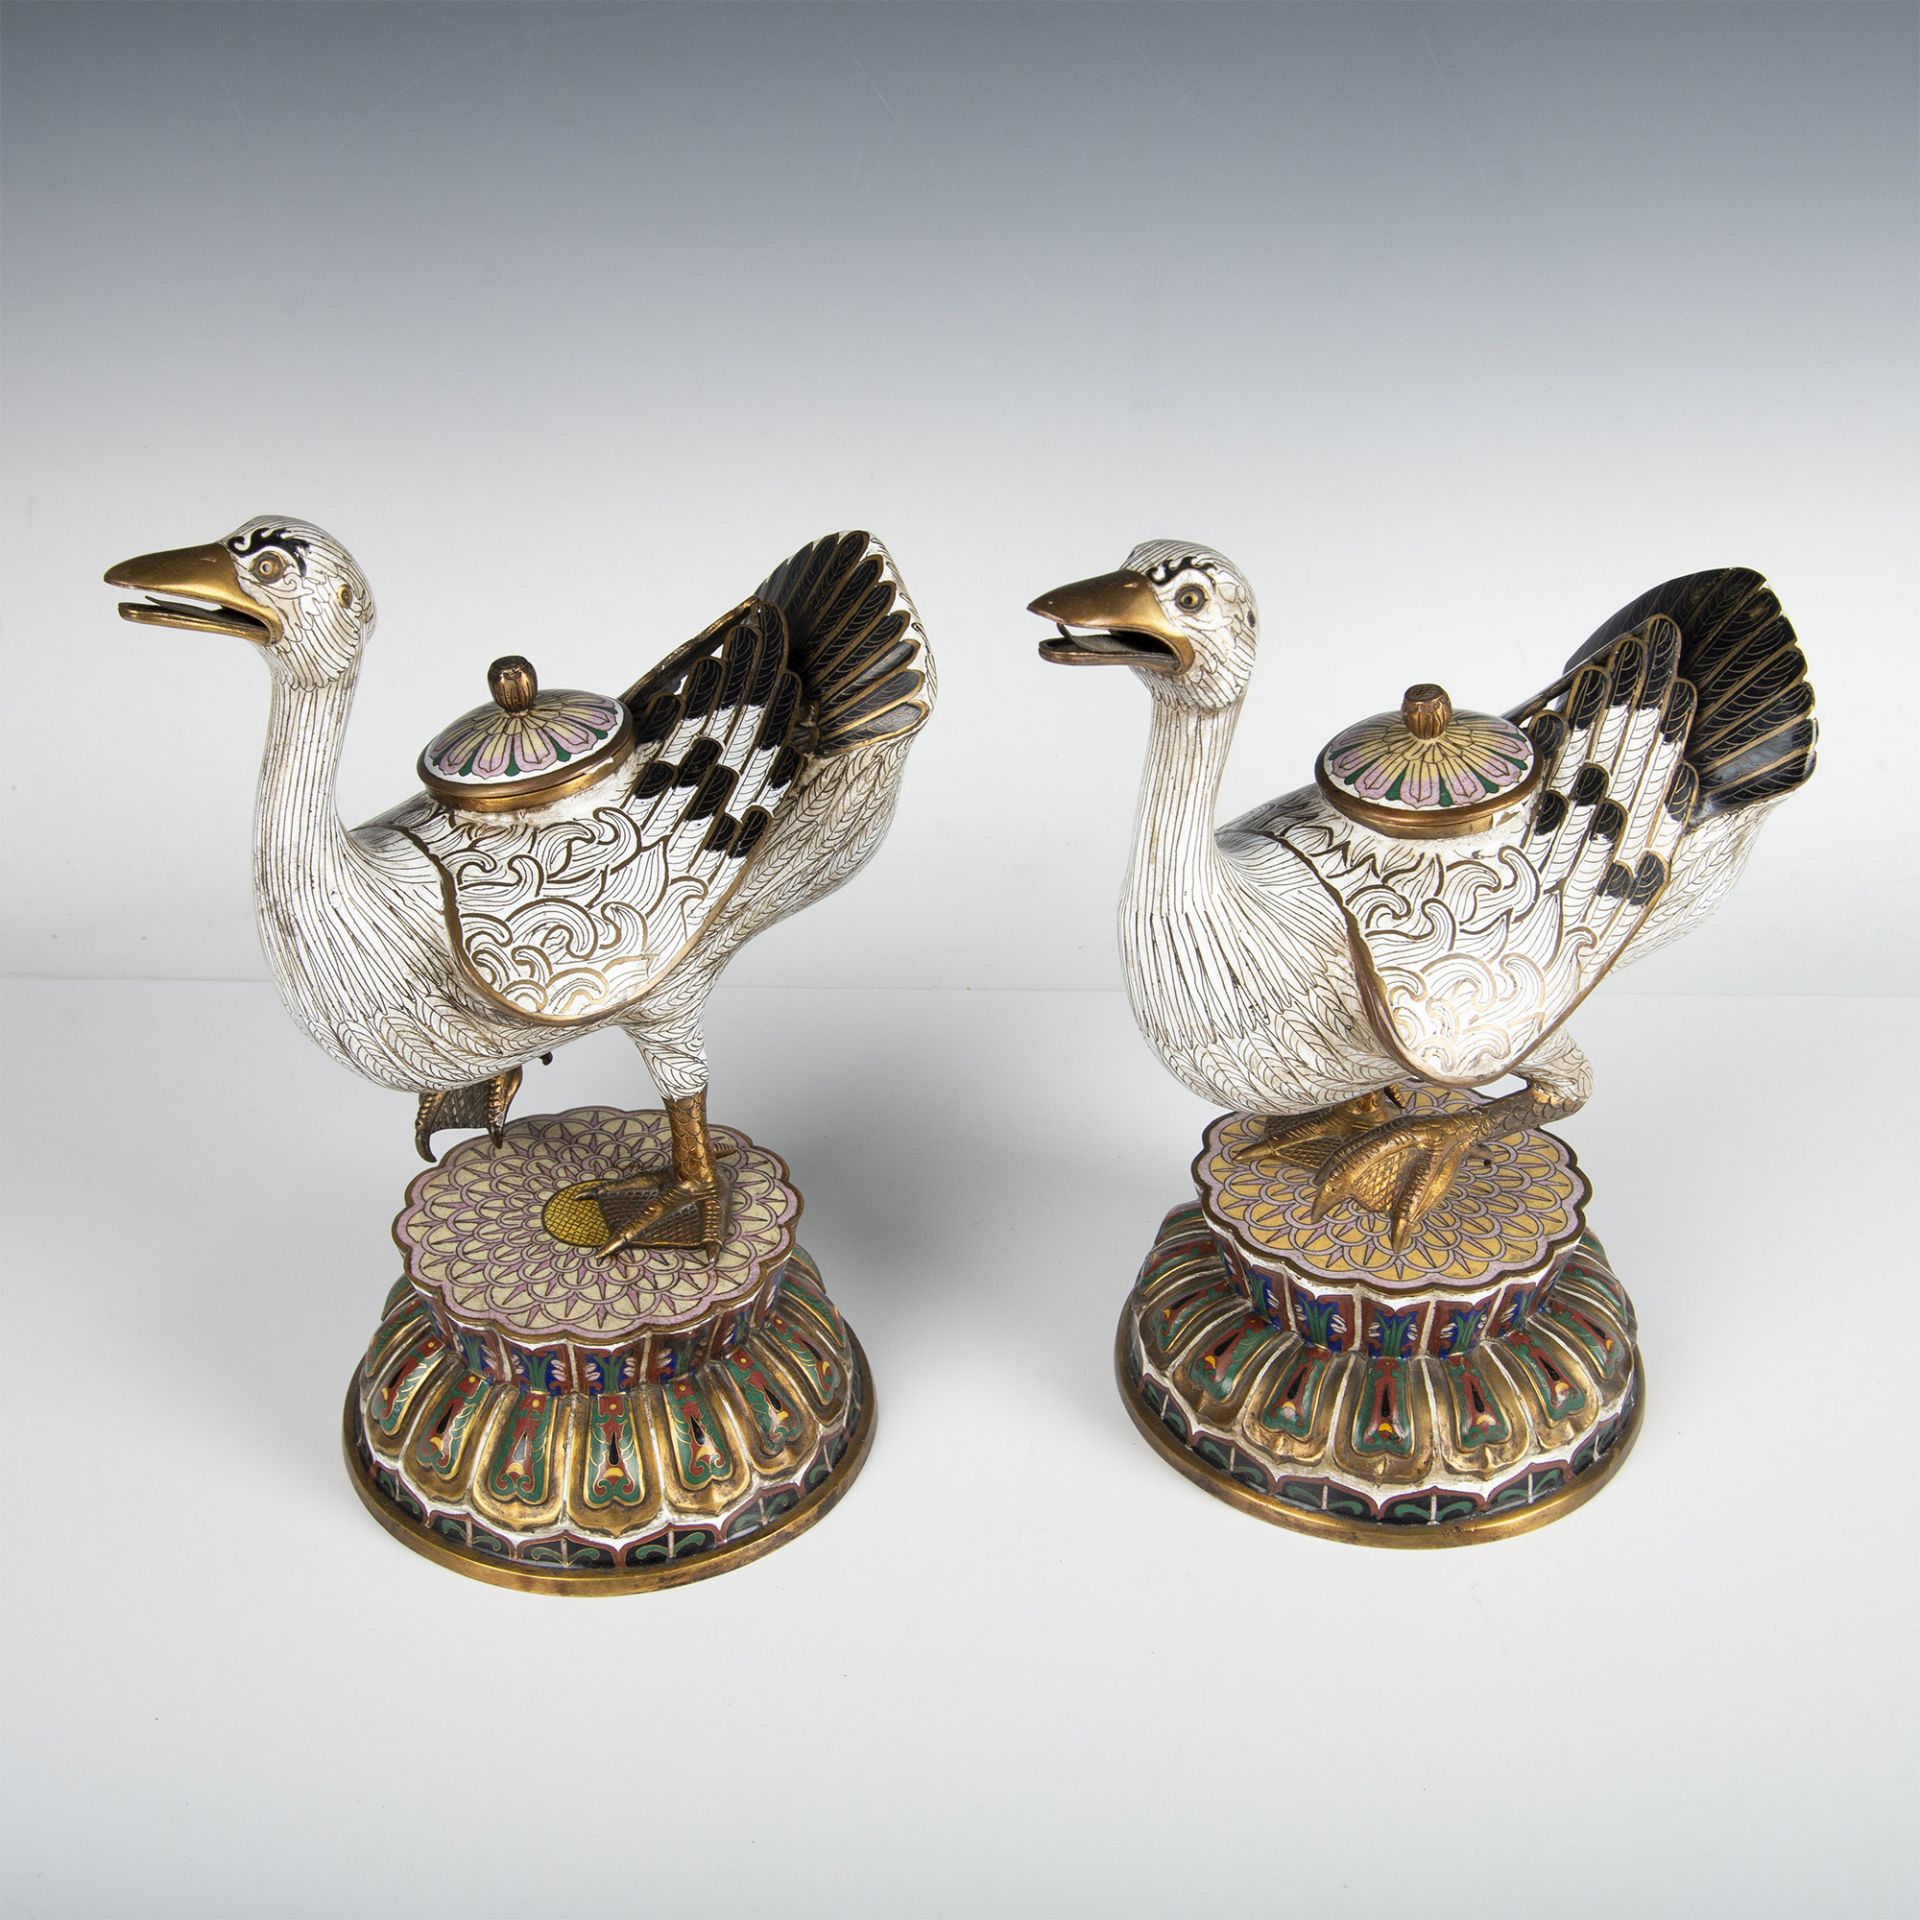 Pair of Chinese Cloisonne Duck Censers - Image 3 of 11